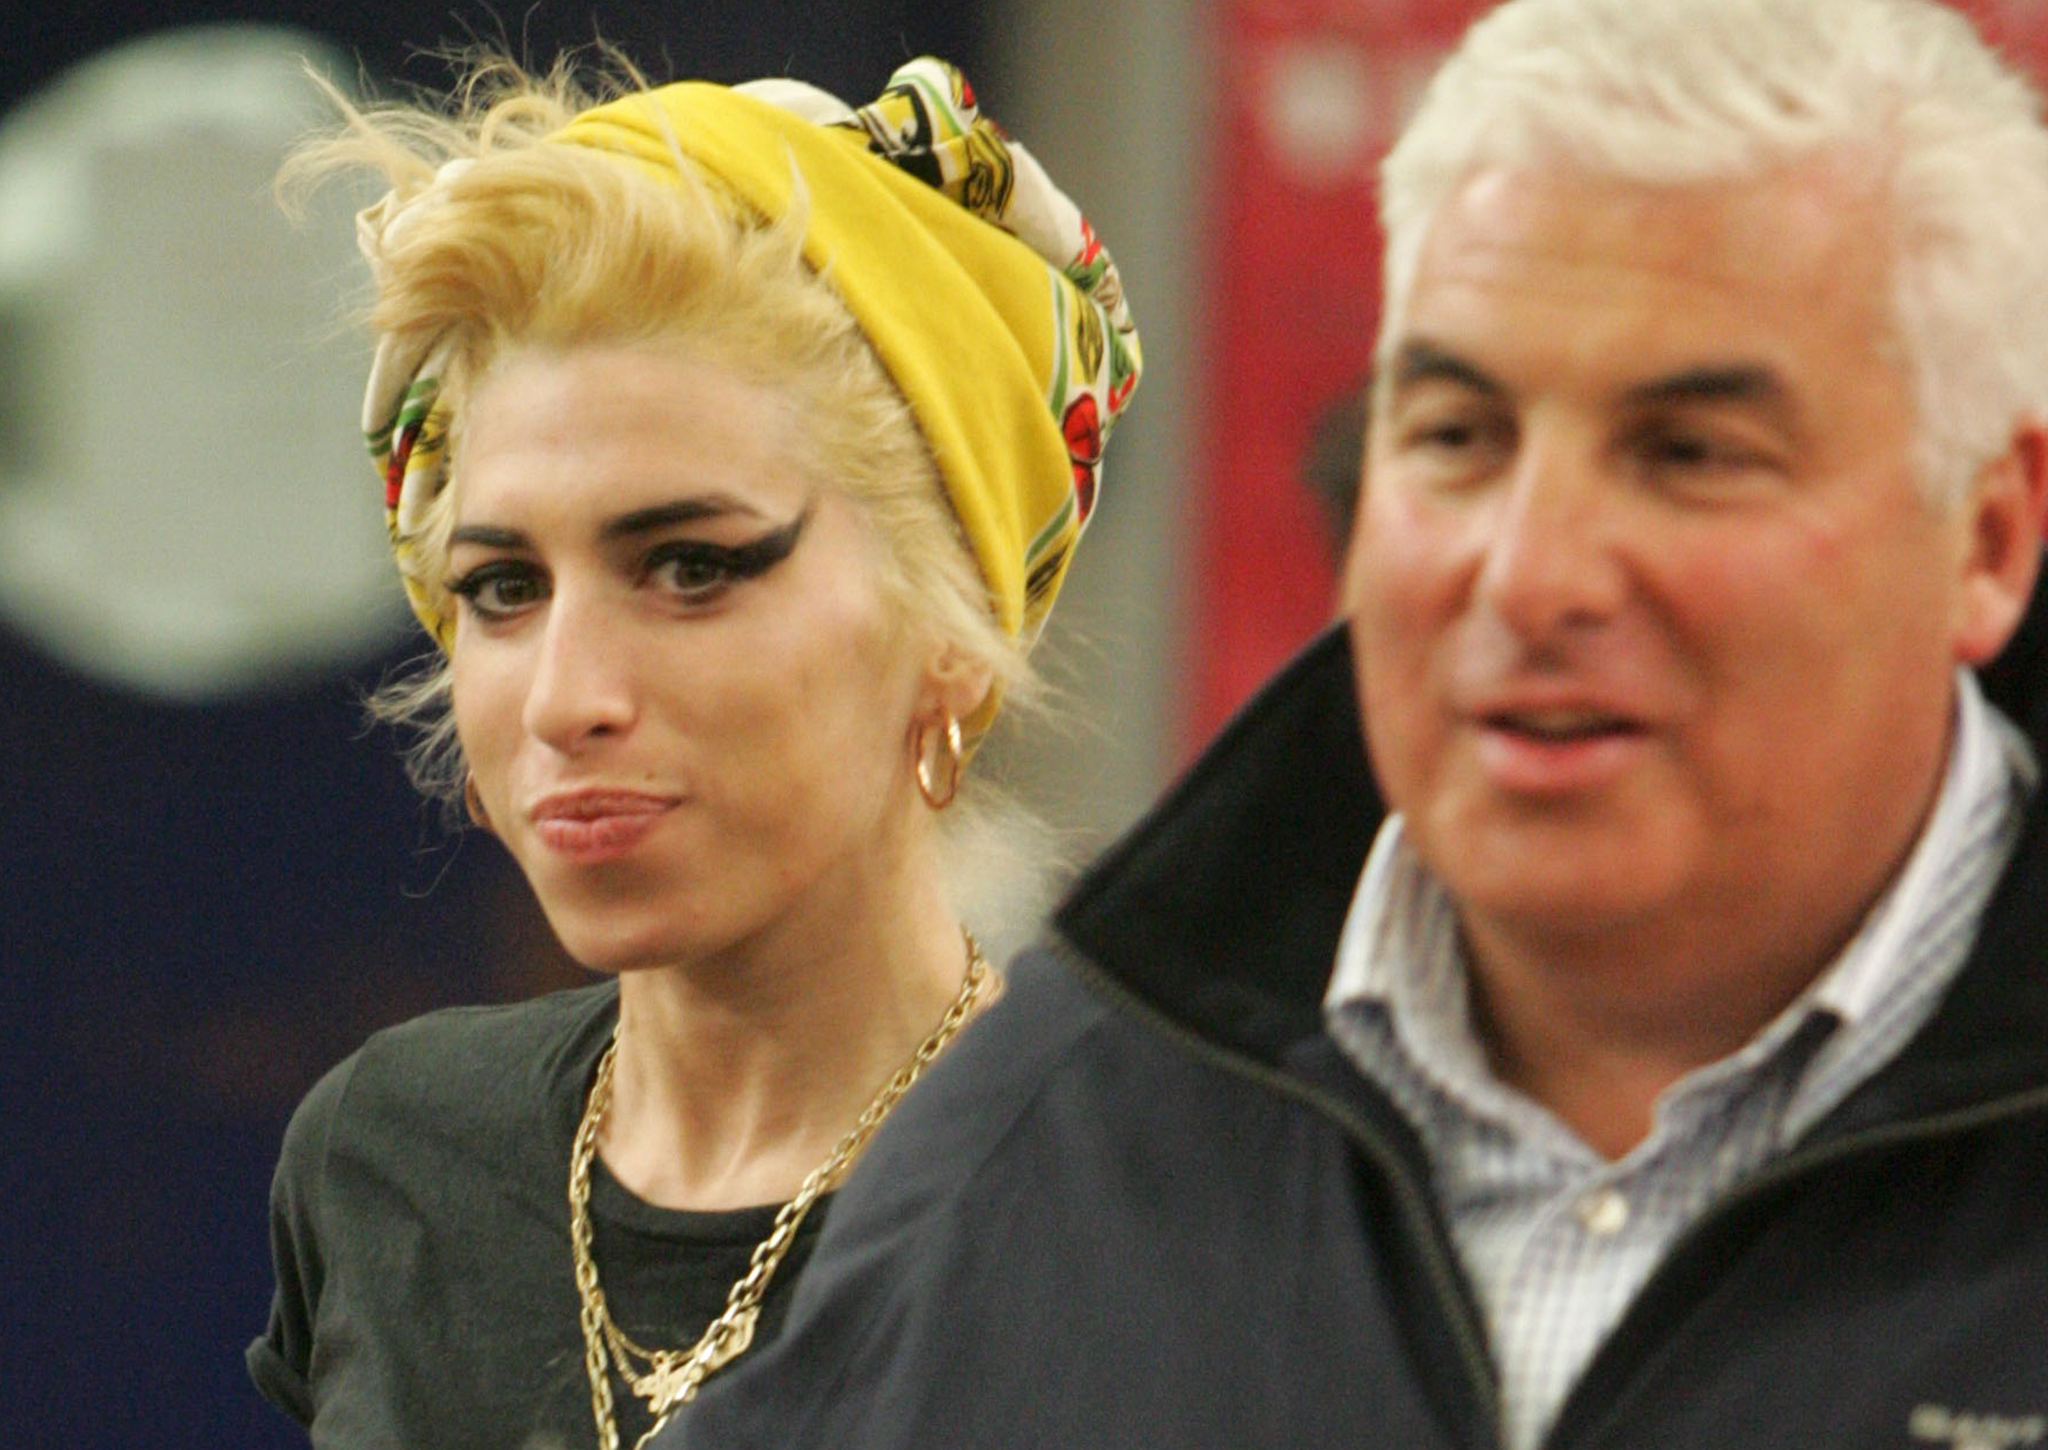 Amy Winehouse and her father Mitch in 2008 (Credit: Beretta/Sims/Rex)